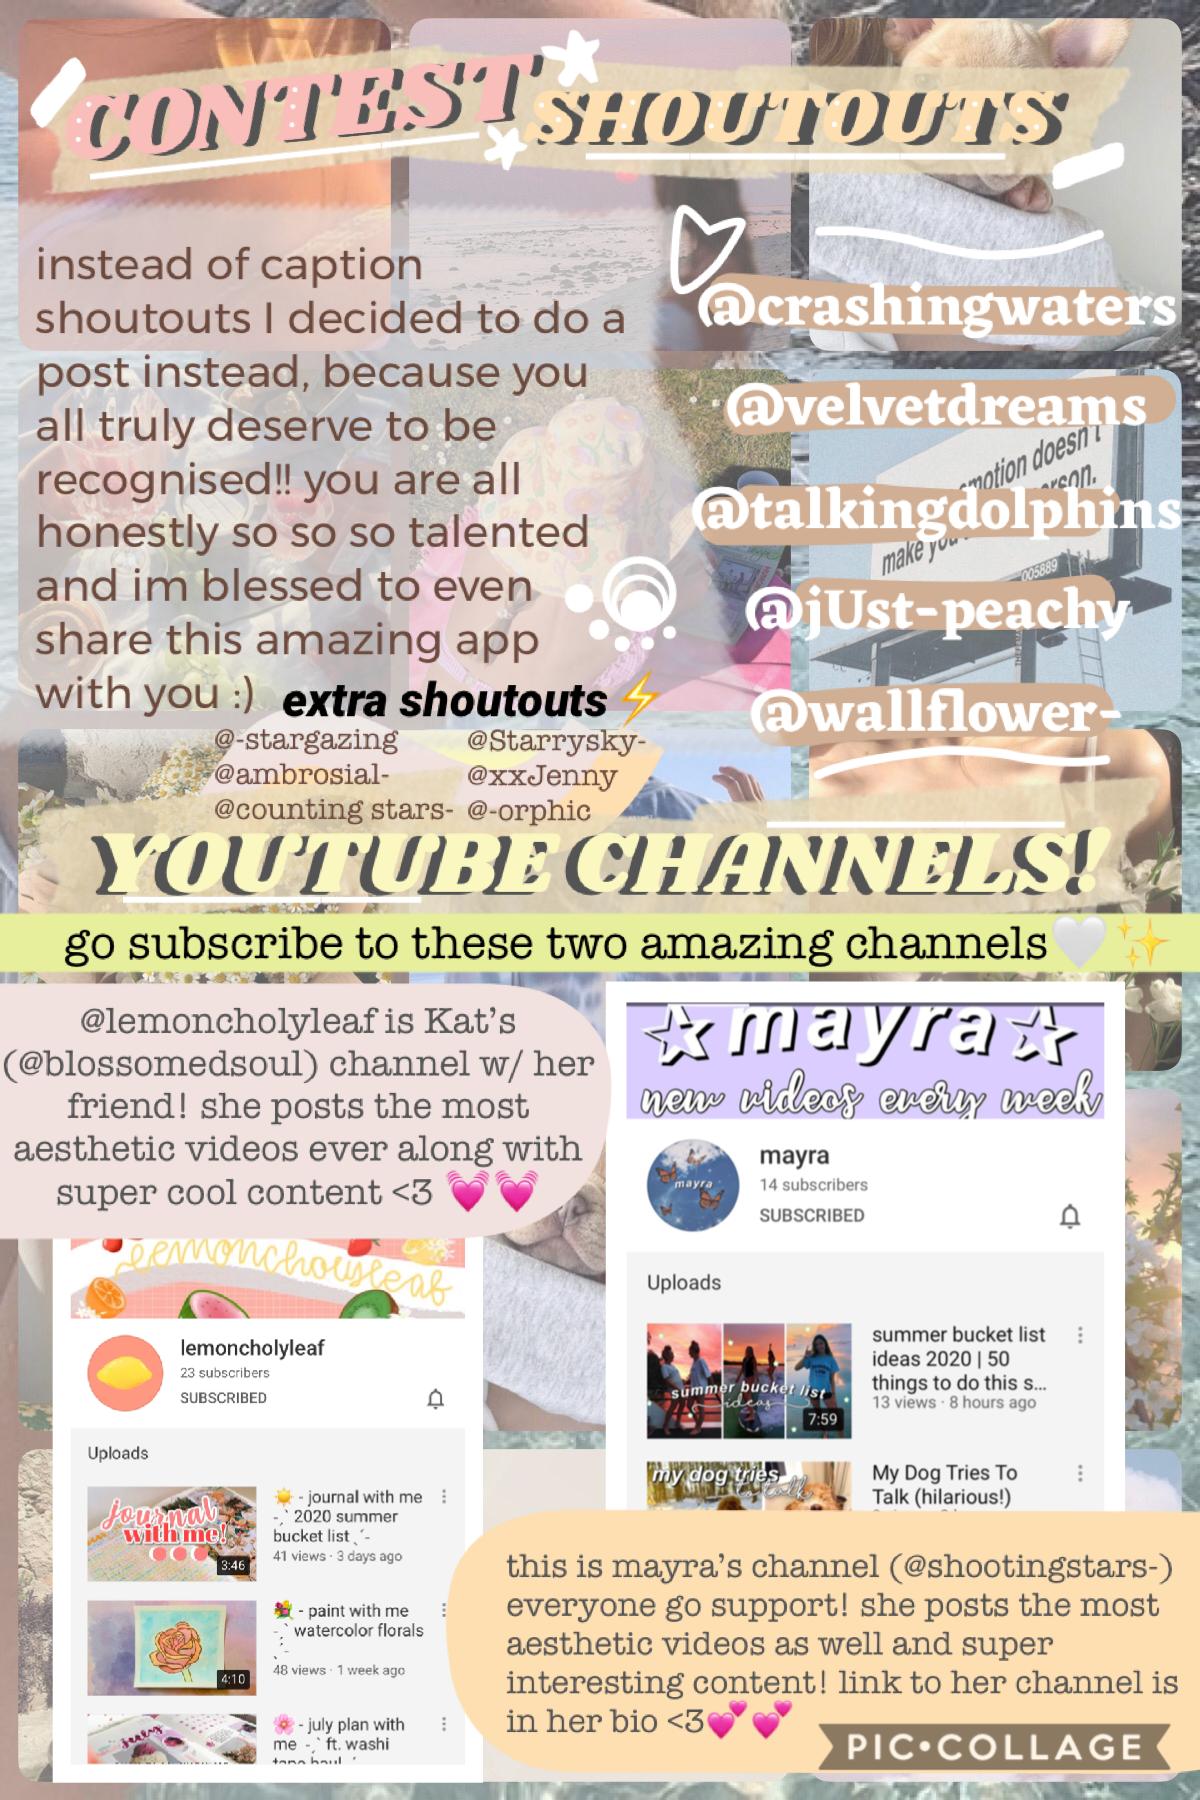 shoutout post⚡️✨im going to be doing shoutout posts every now and then to feature some of you because honestly your talent blows me away🤯🤩alsoo everyone go sub to these YouTube channels!!💗💓